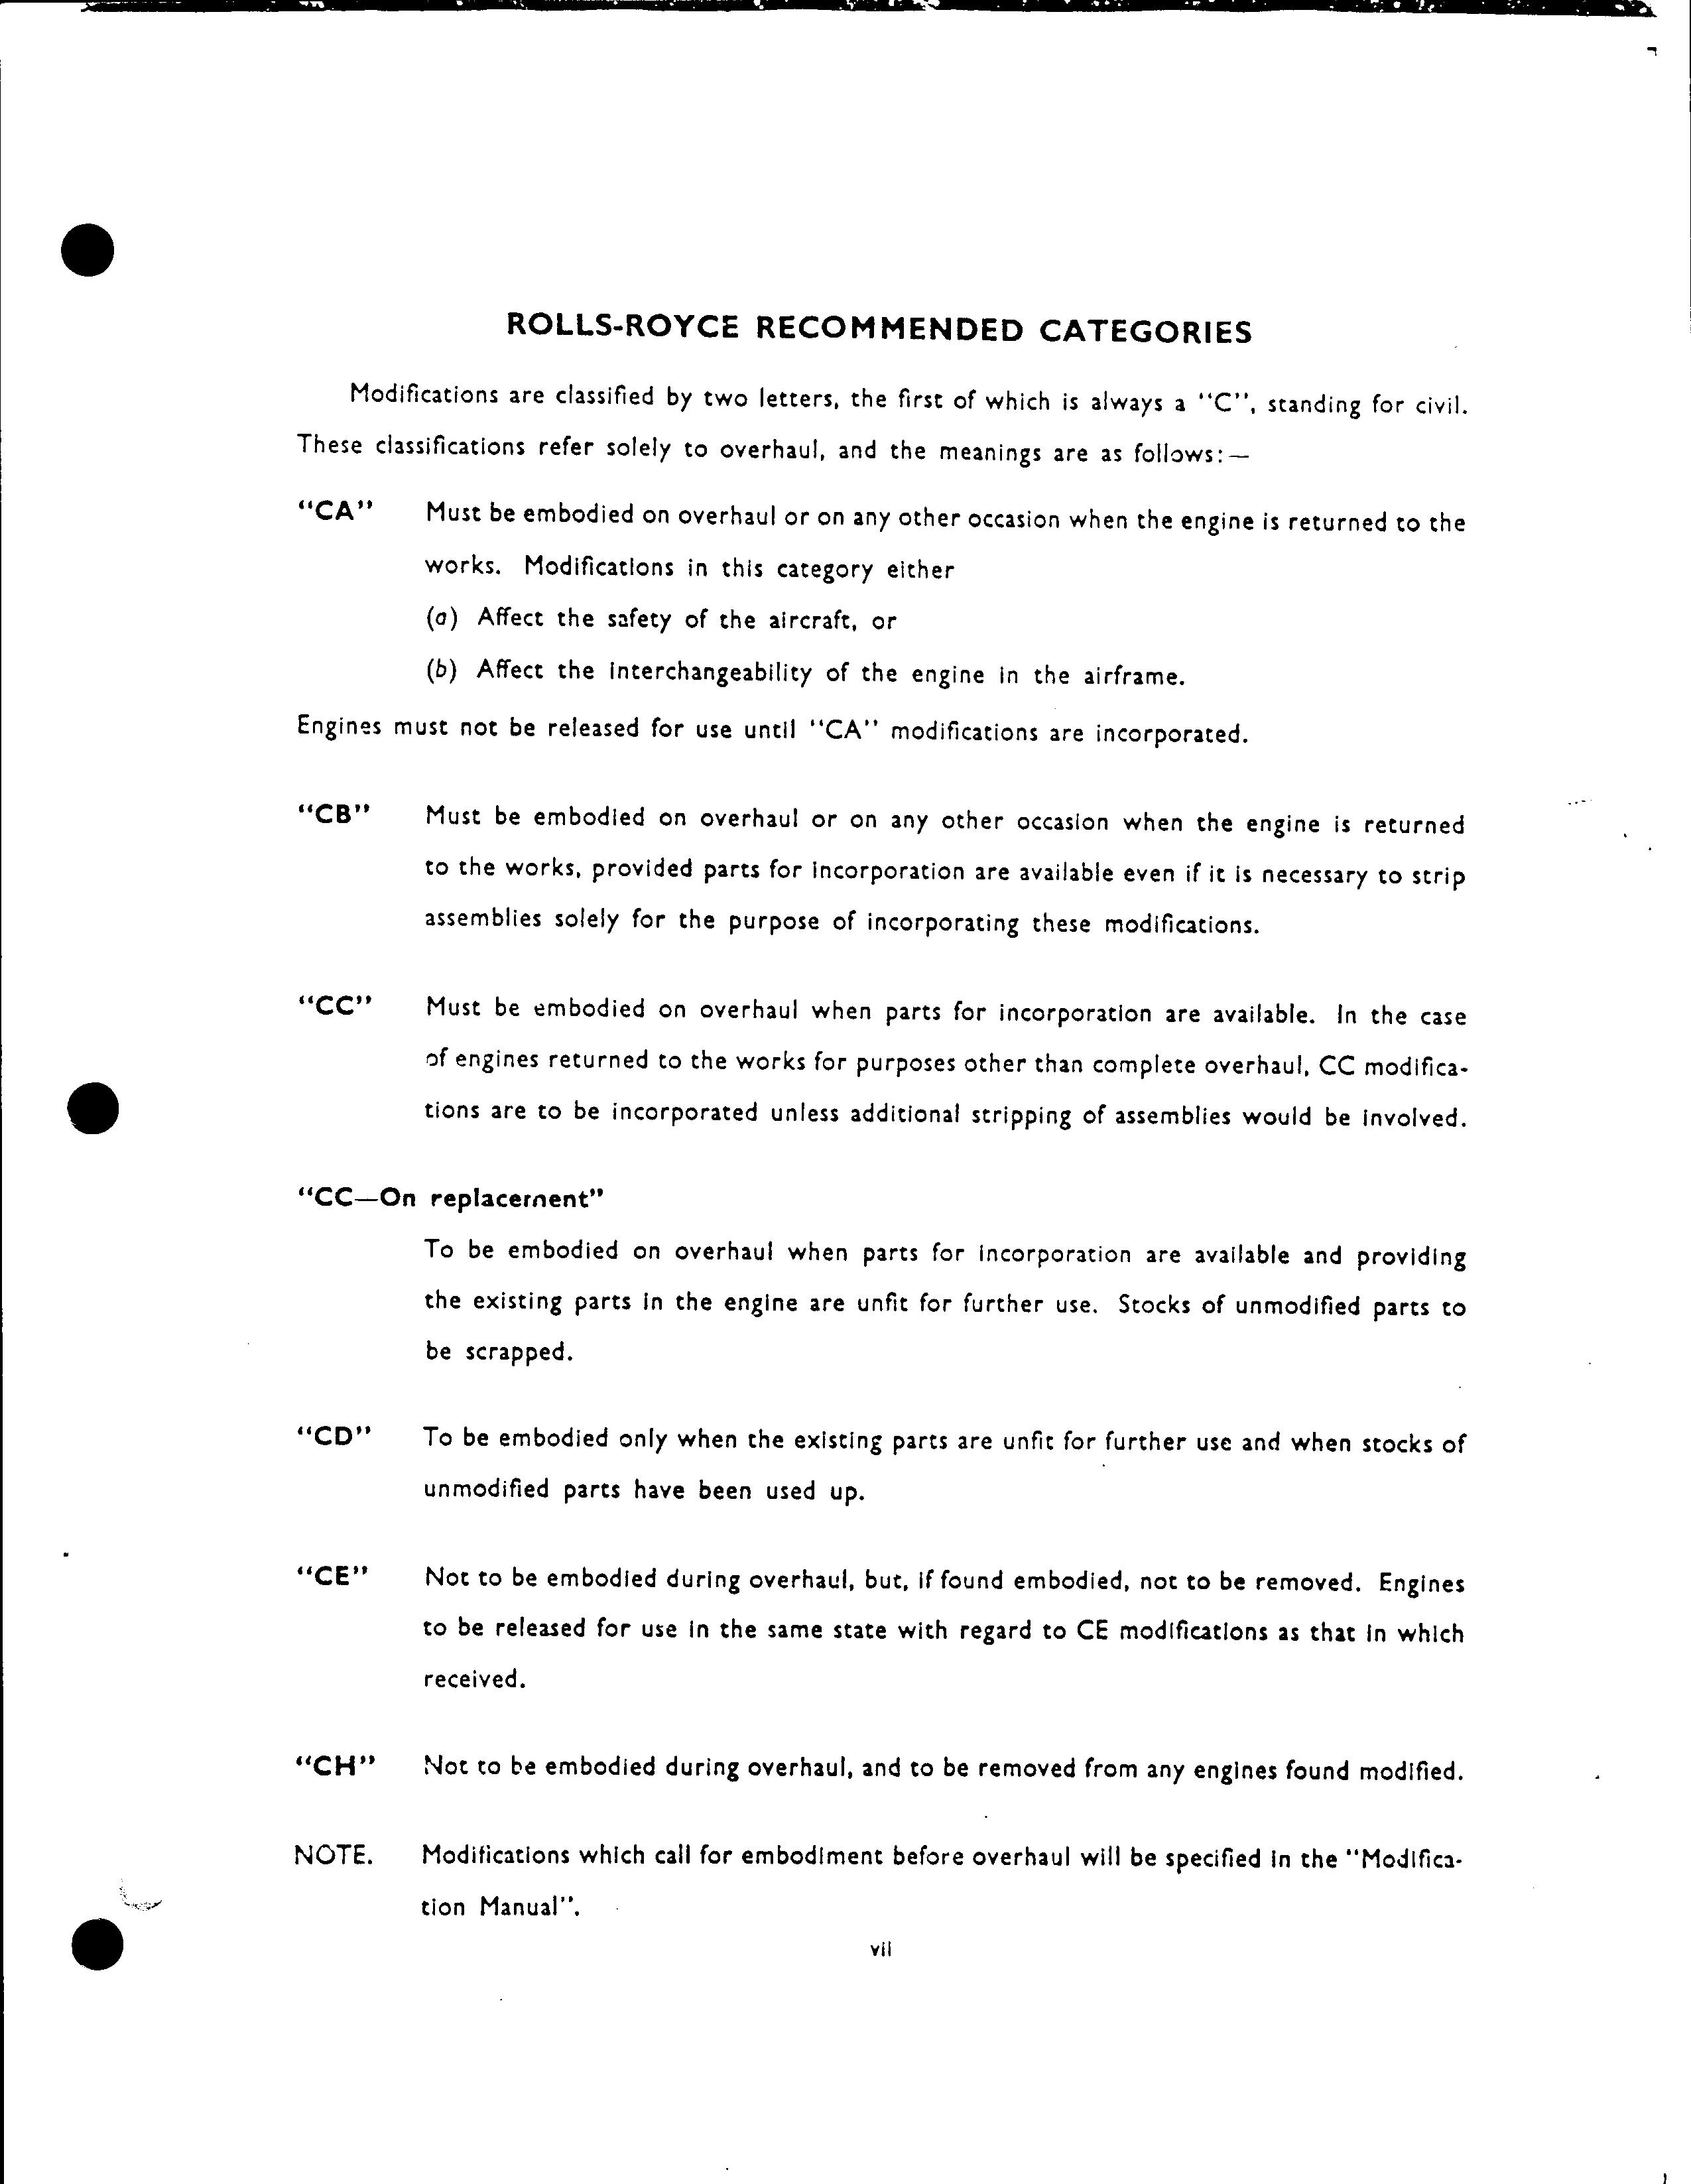 Sample page 9 from AirCorps Library document: Numerical List of Modifications to Rolls Royce Merlin Engines